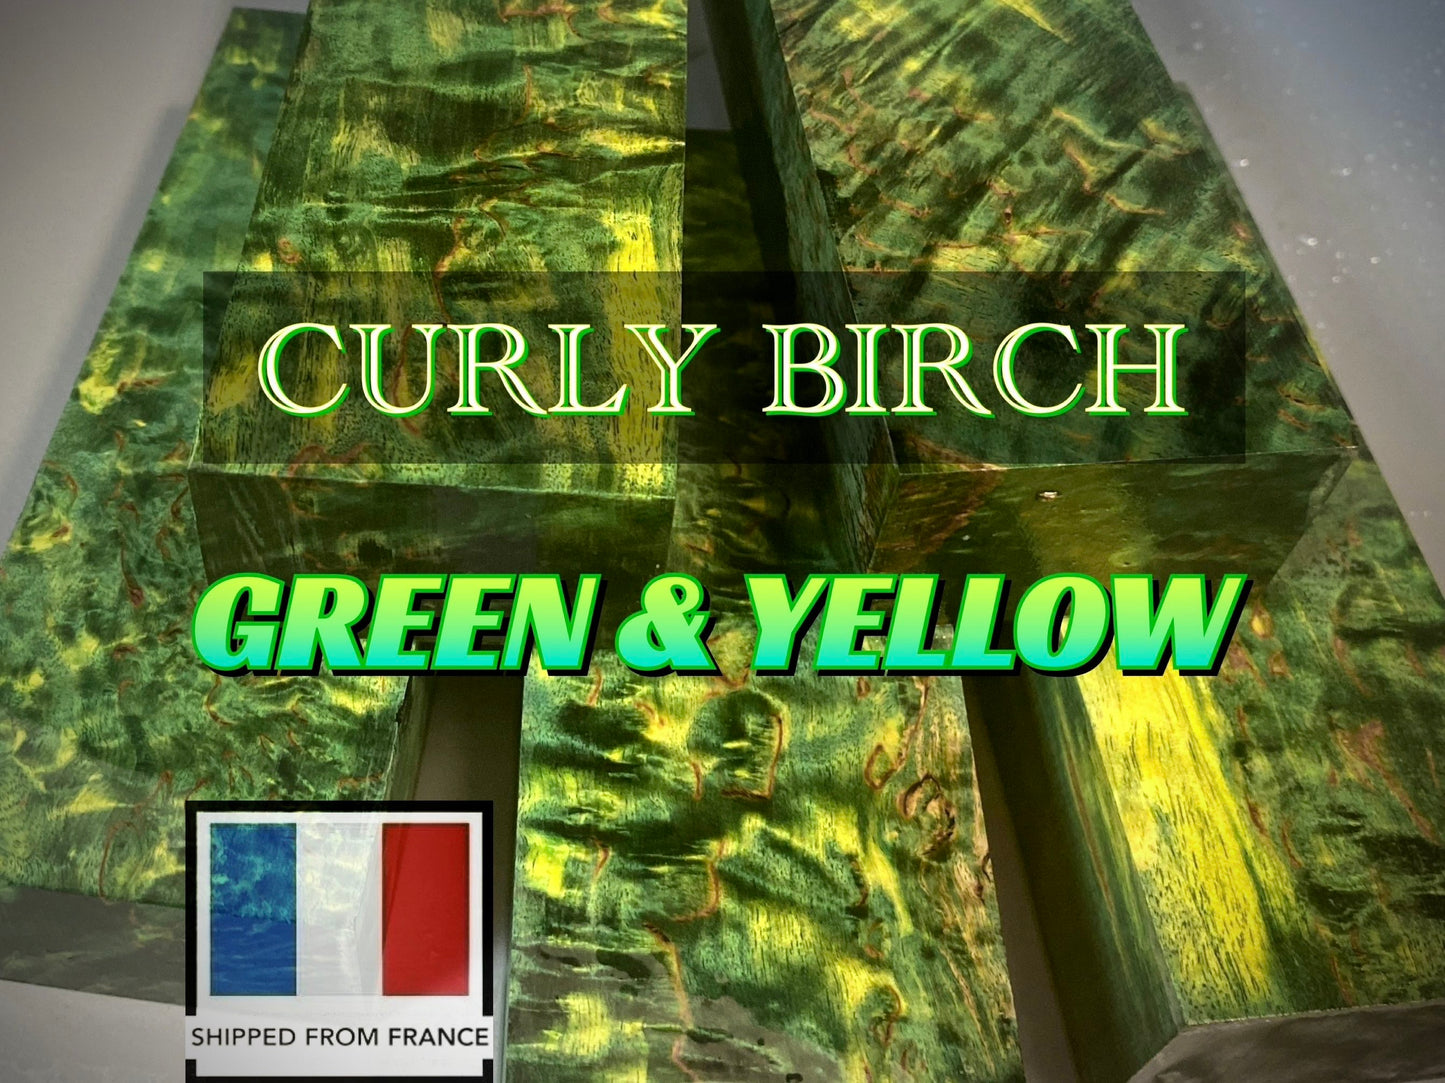 CURLY BIRCH Stabilized Wood, Green & Yellow Color Blanks for Woodworking. France Stock.